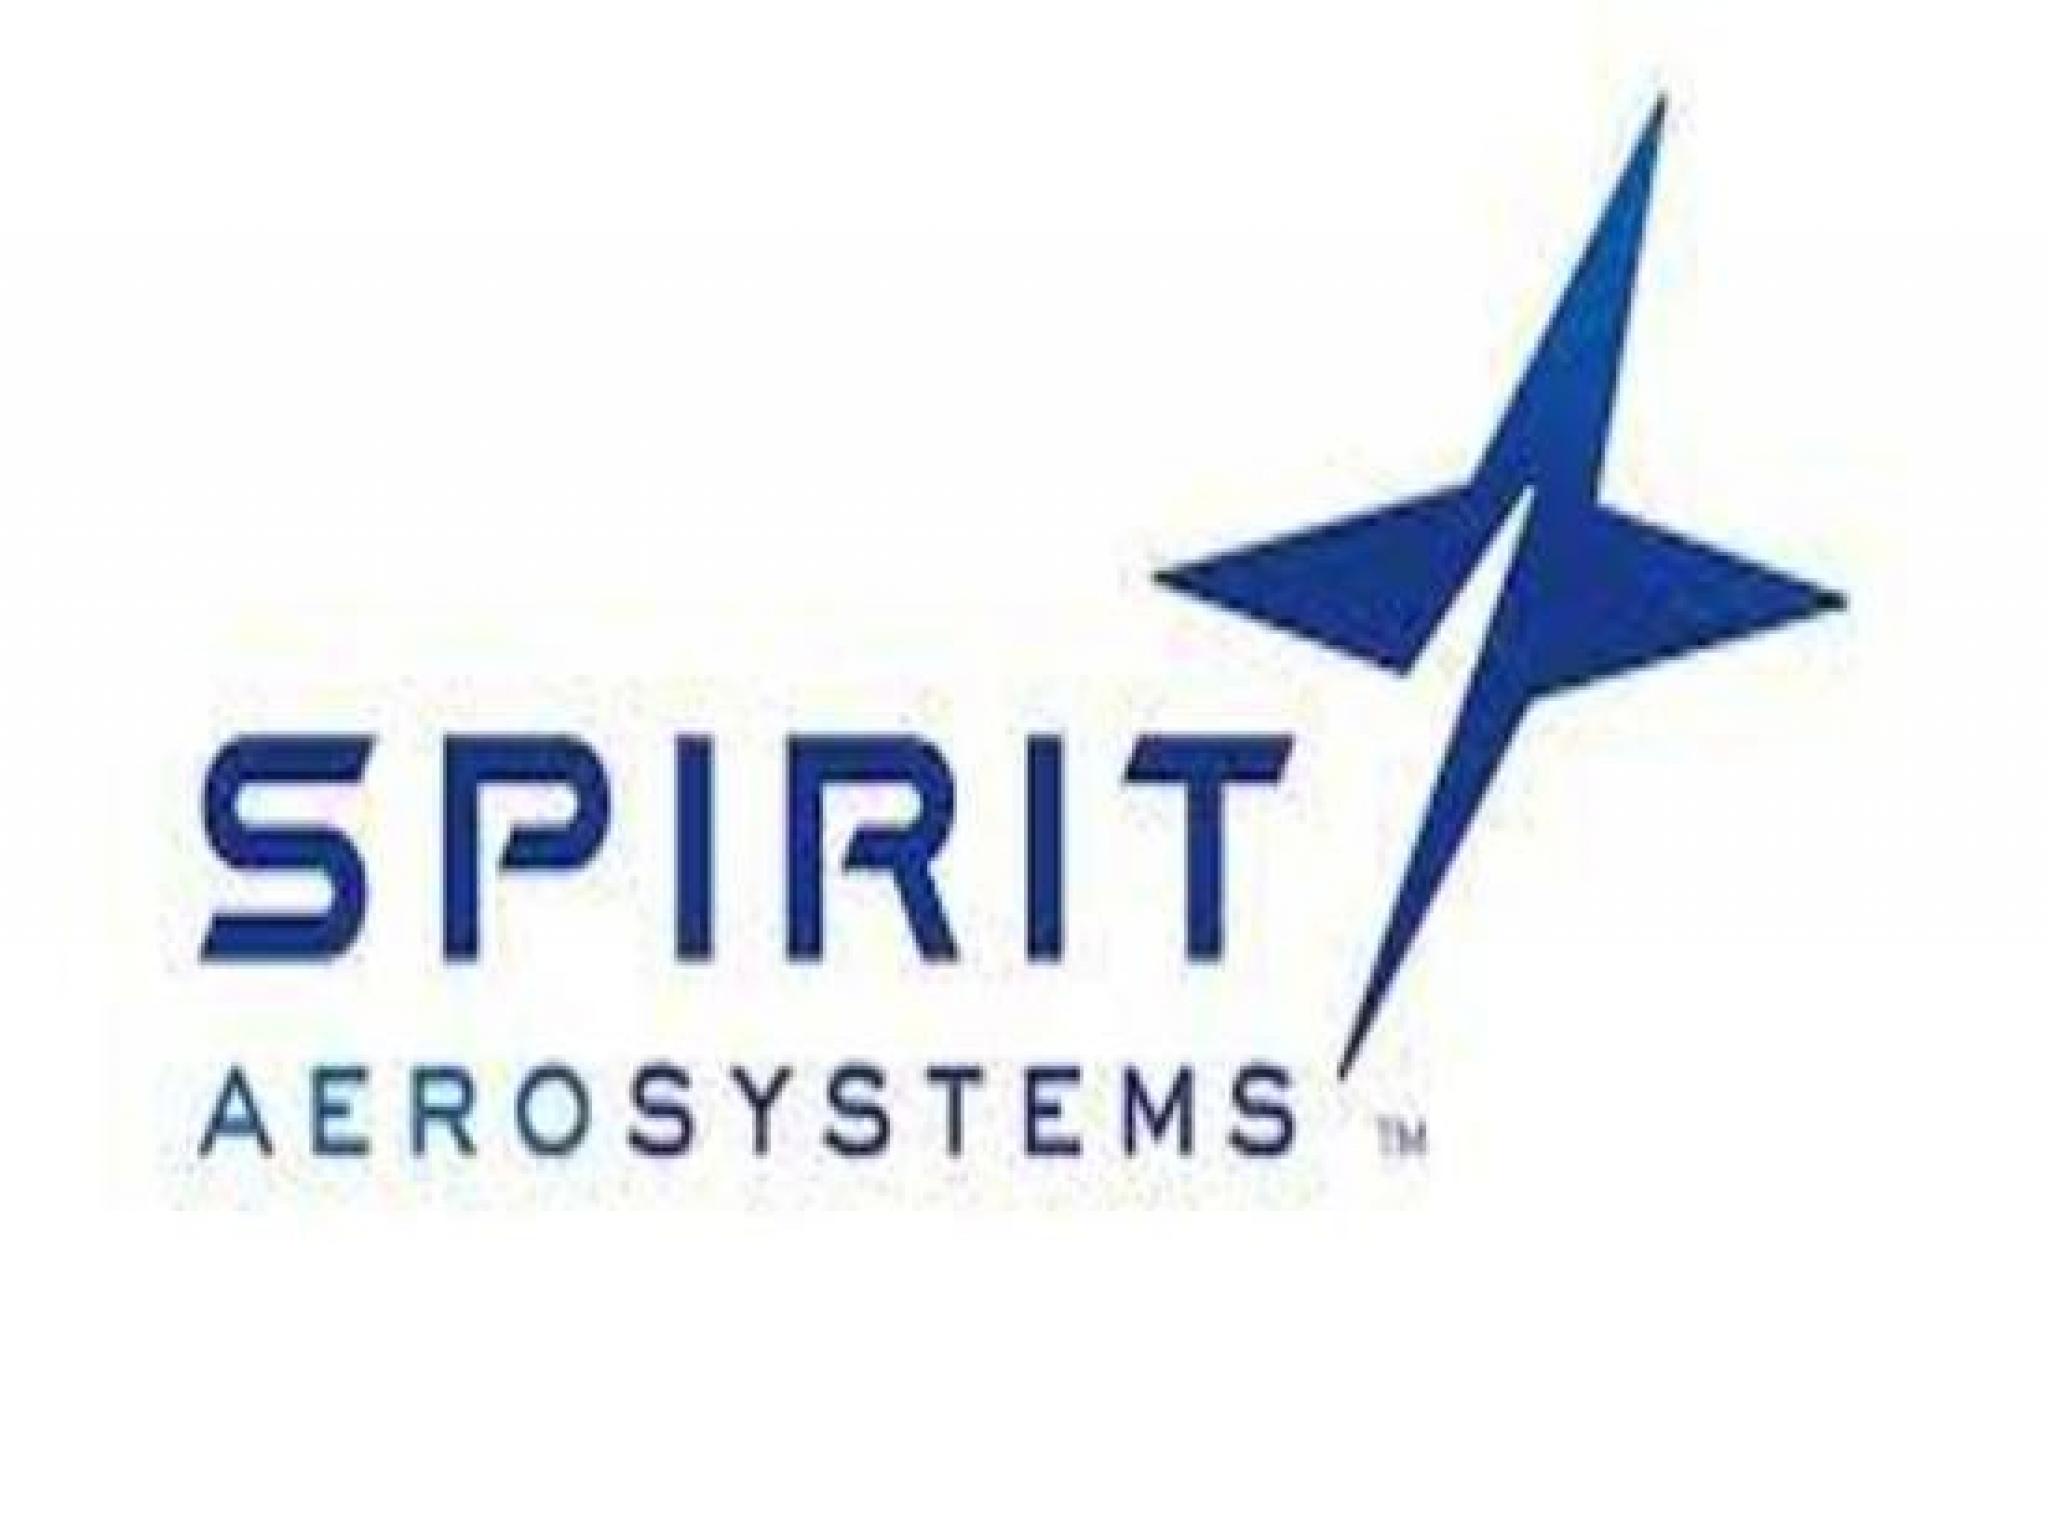  spirit-aerosystems-oyster-point-pharma-snap-and-other-big-gainers-from-monday 